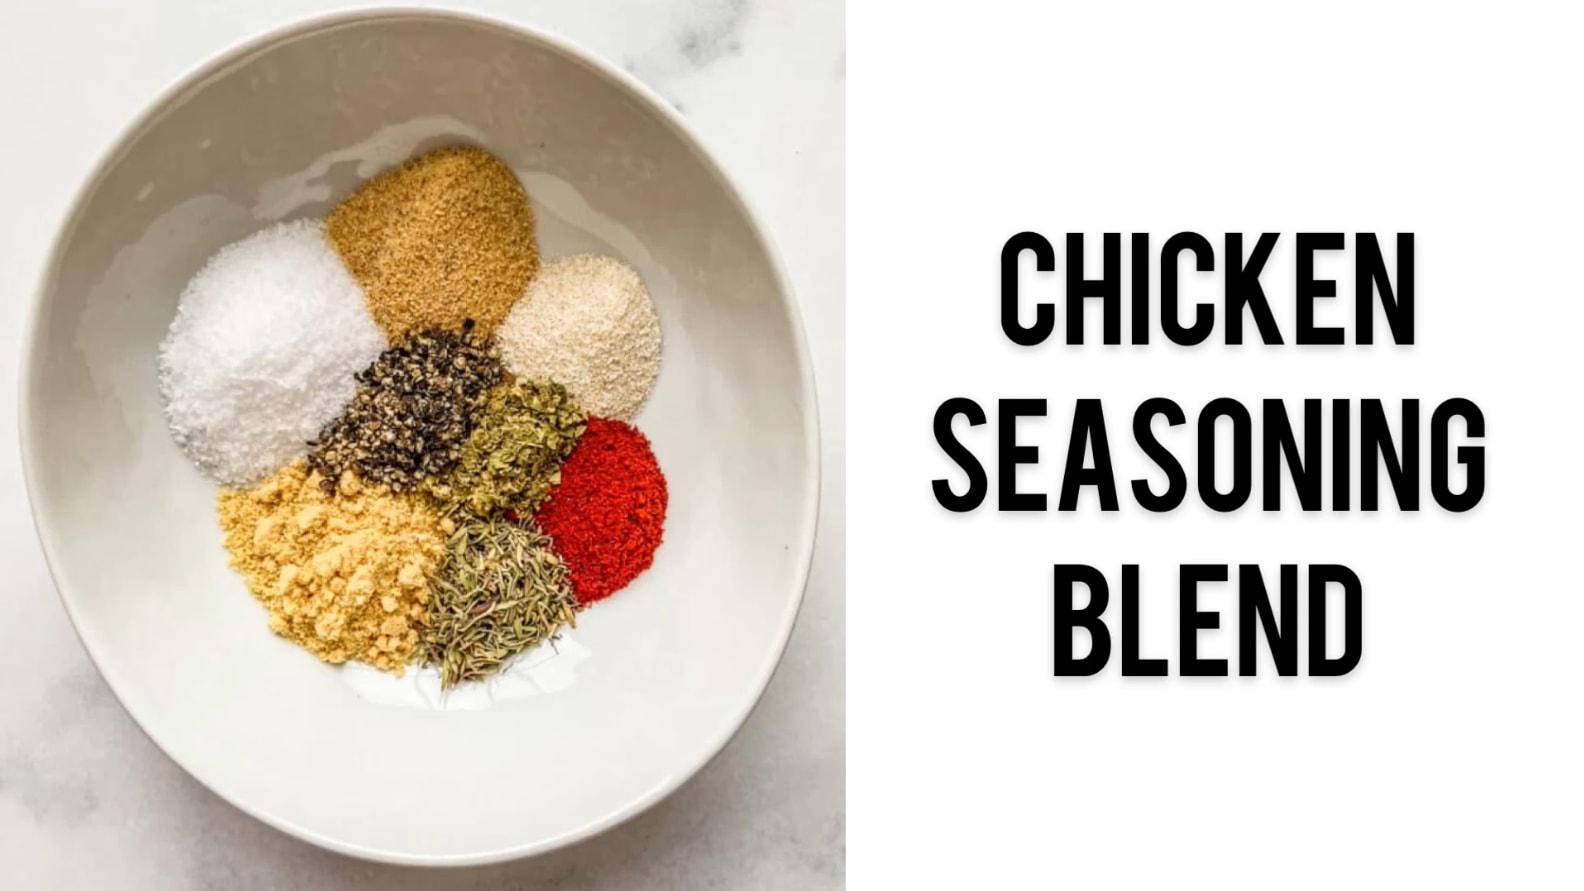 Chicken Seasoning Blend - This Healthy Table